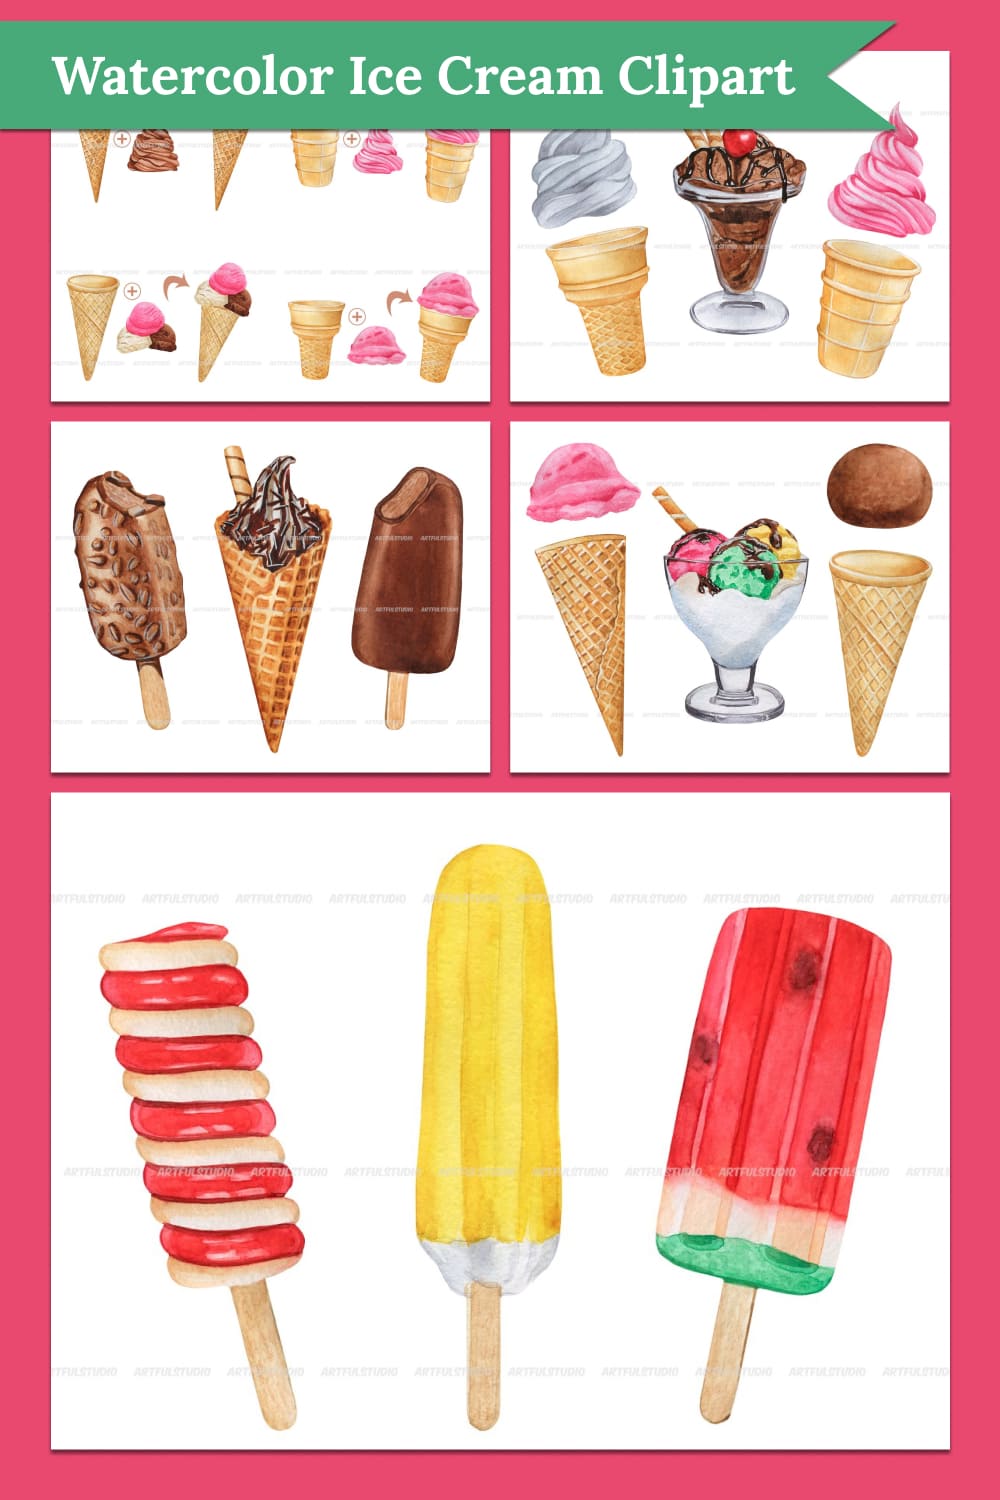 Watercolor ice cream clipart - pinterest image preview.